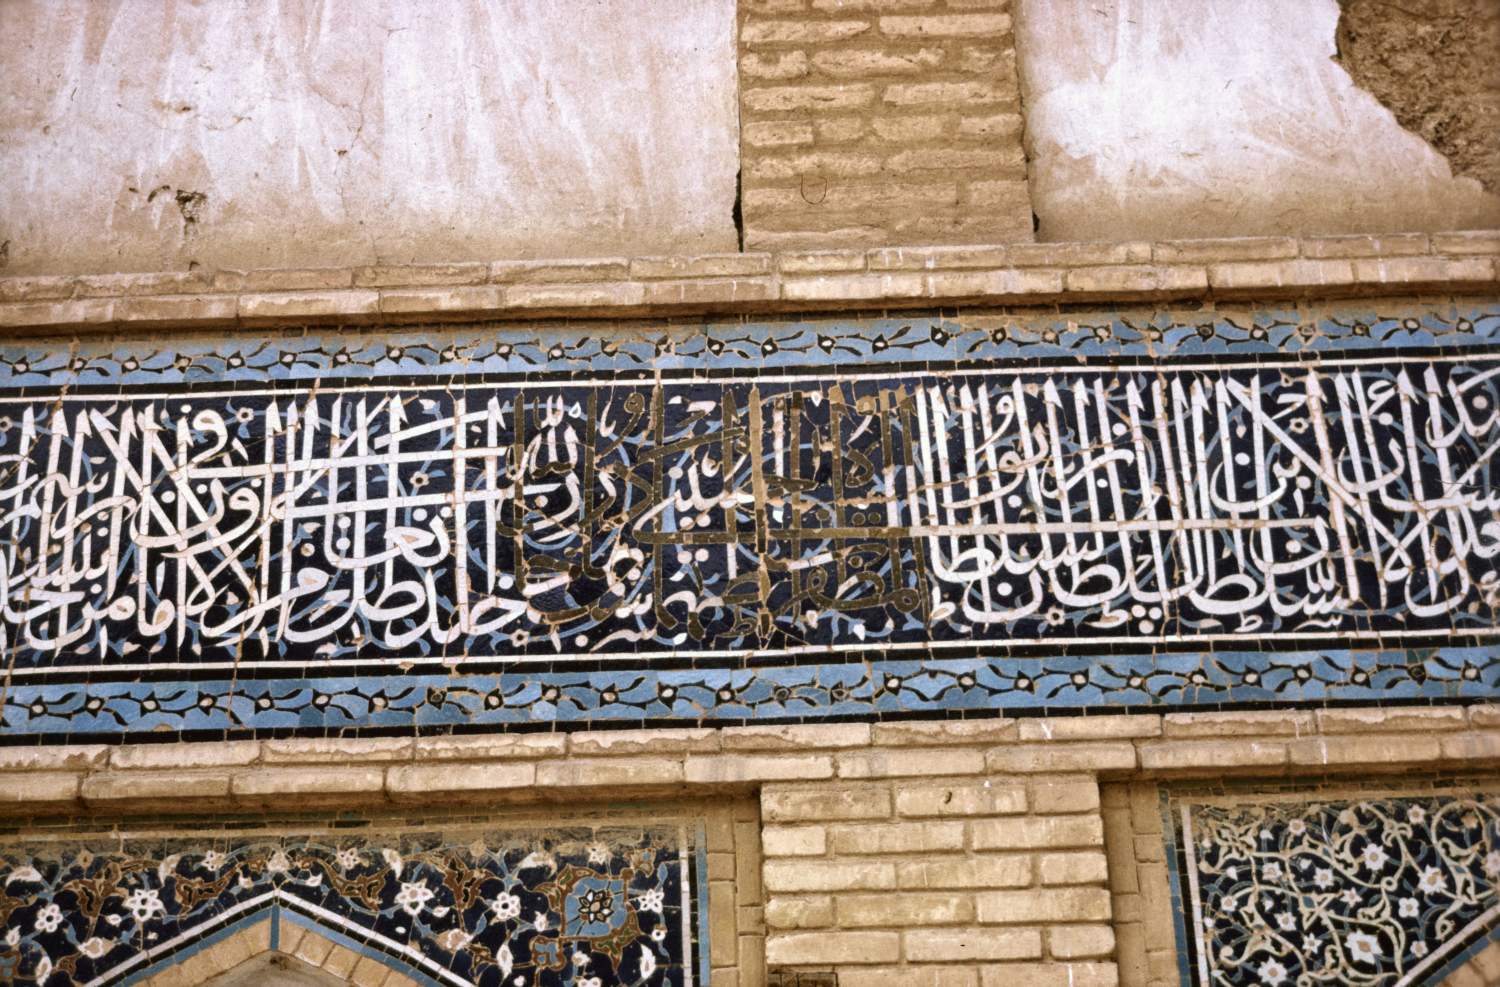 View of inscription band dated 1548.